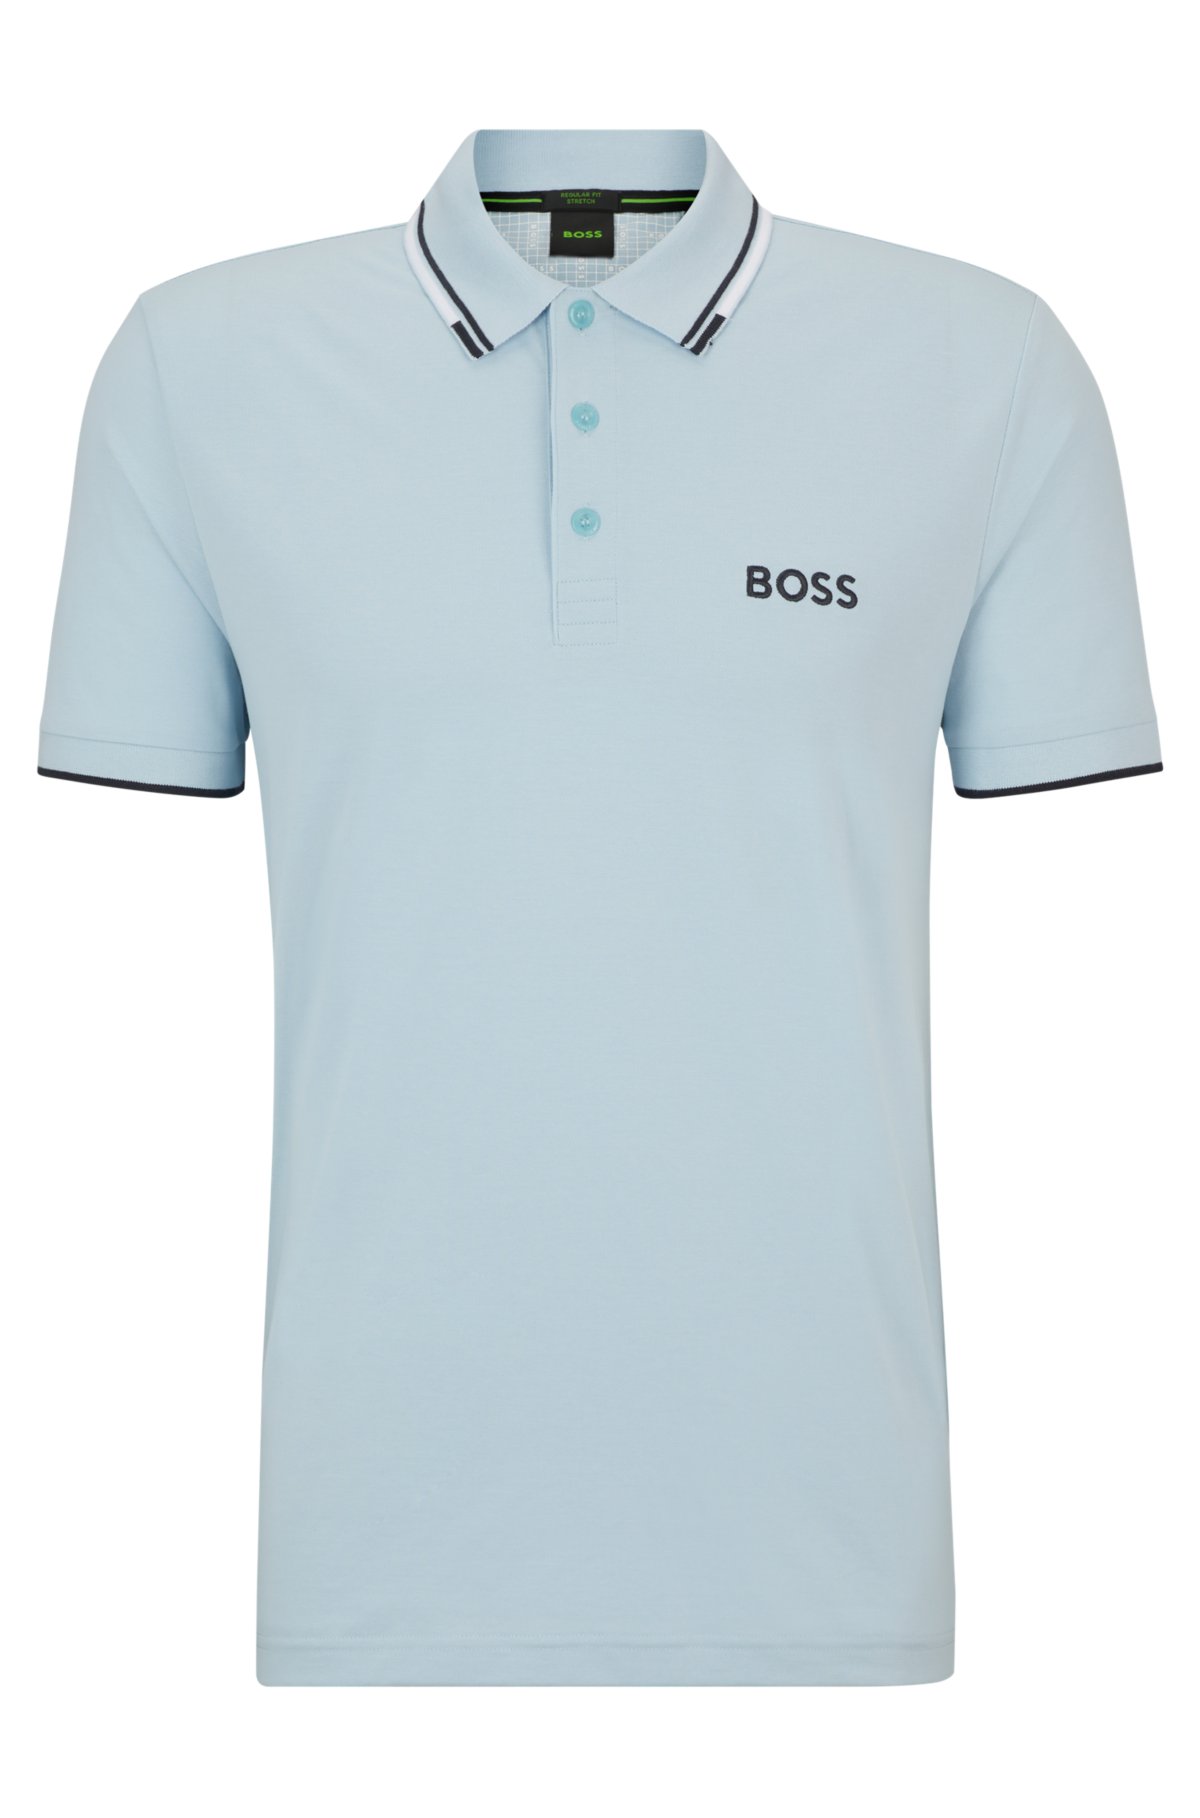 shirt contrast - Cotton-blend details BOSS polo with